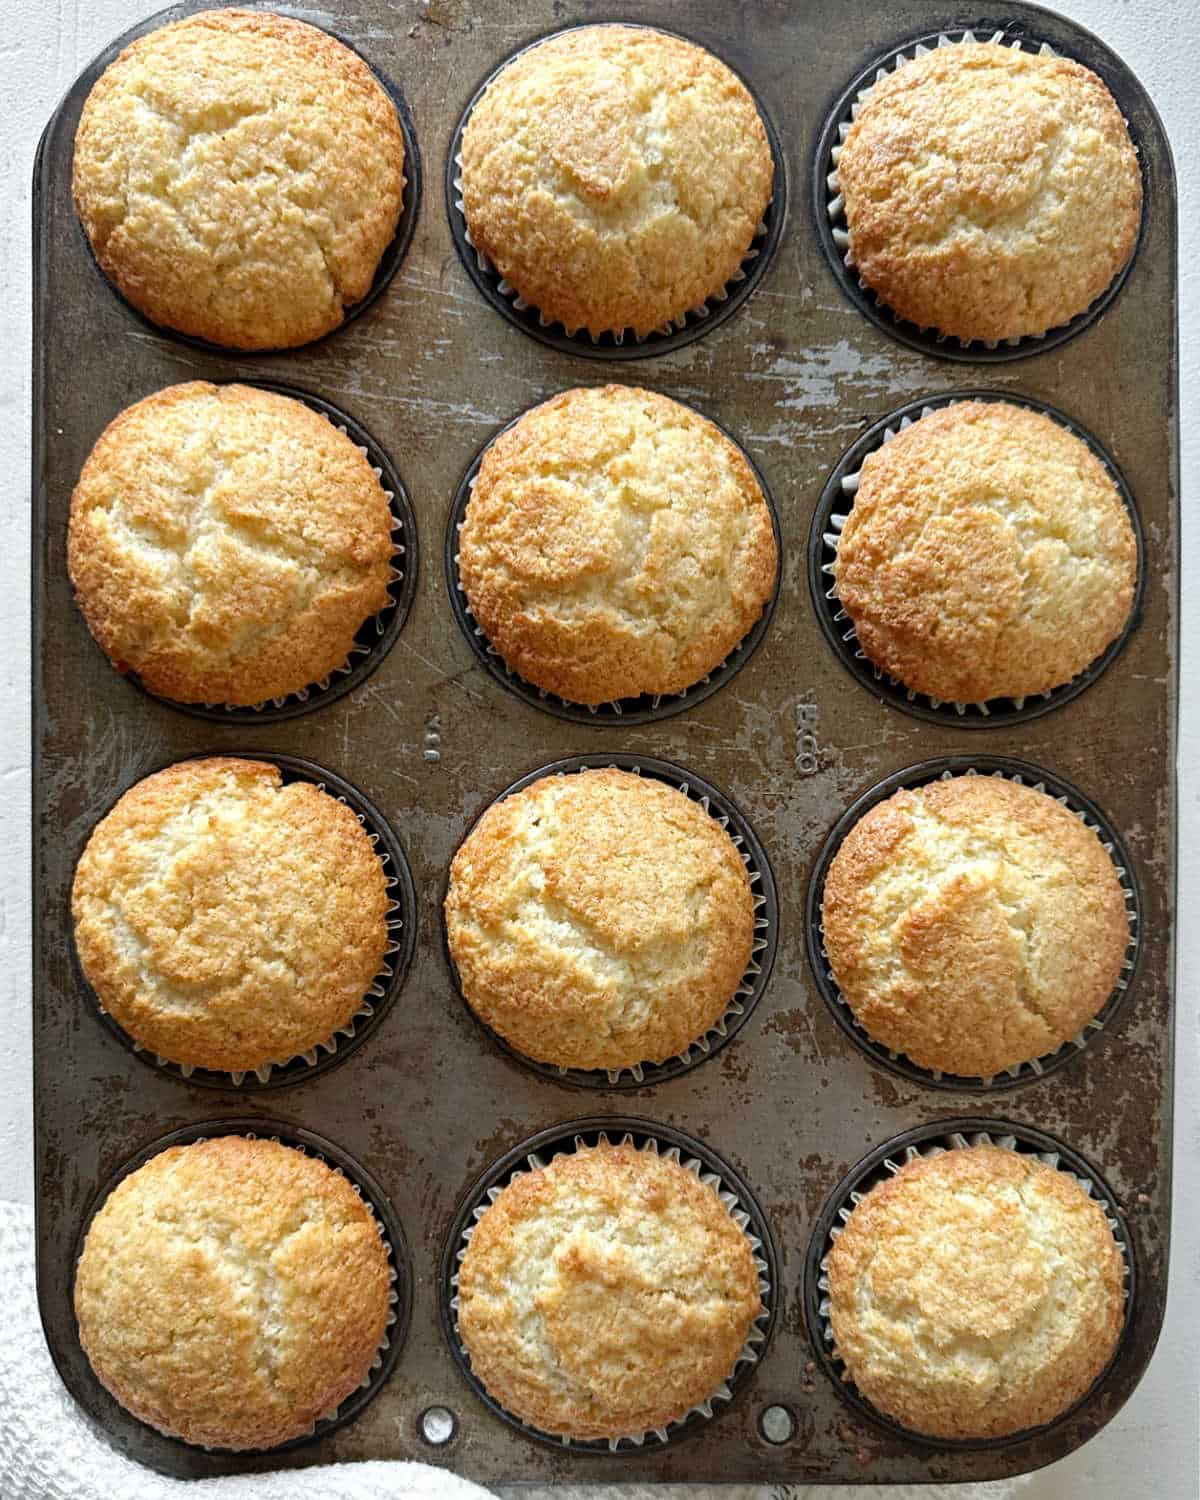 Twelve baked coconut muffins in a metal tin. Top view.